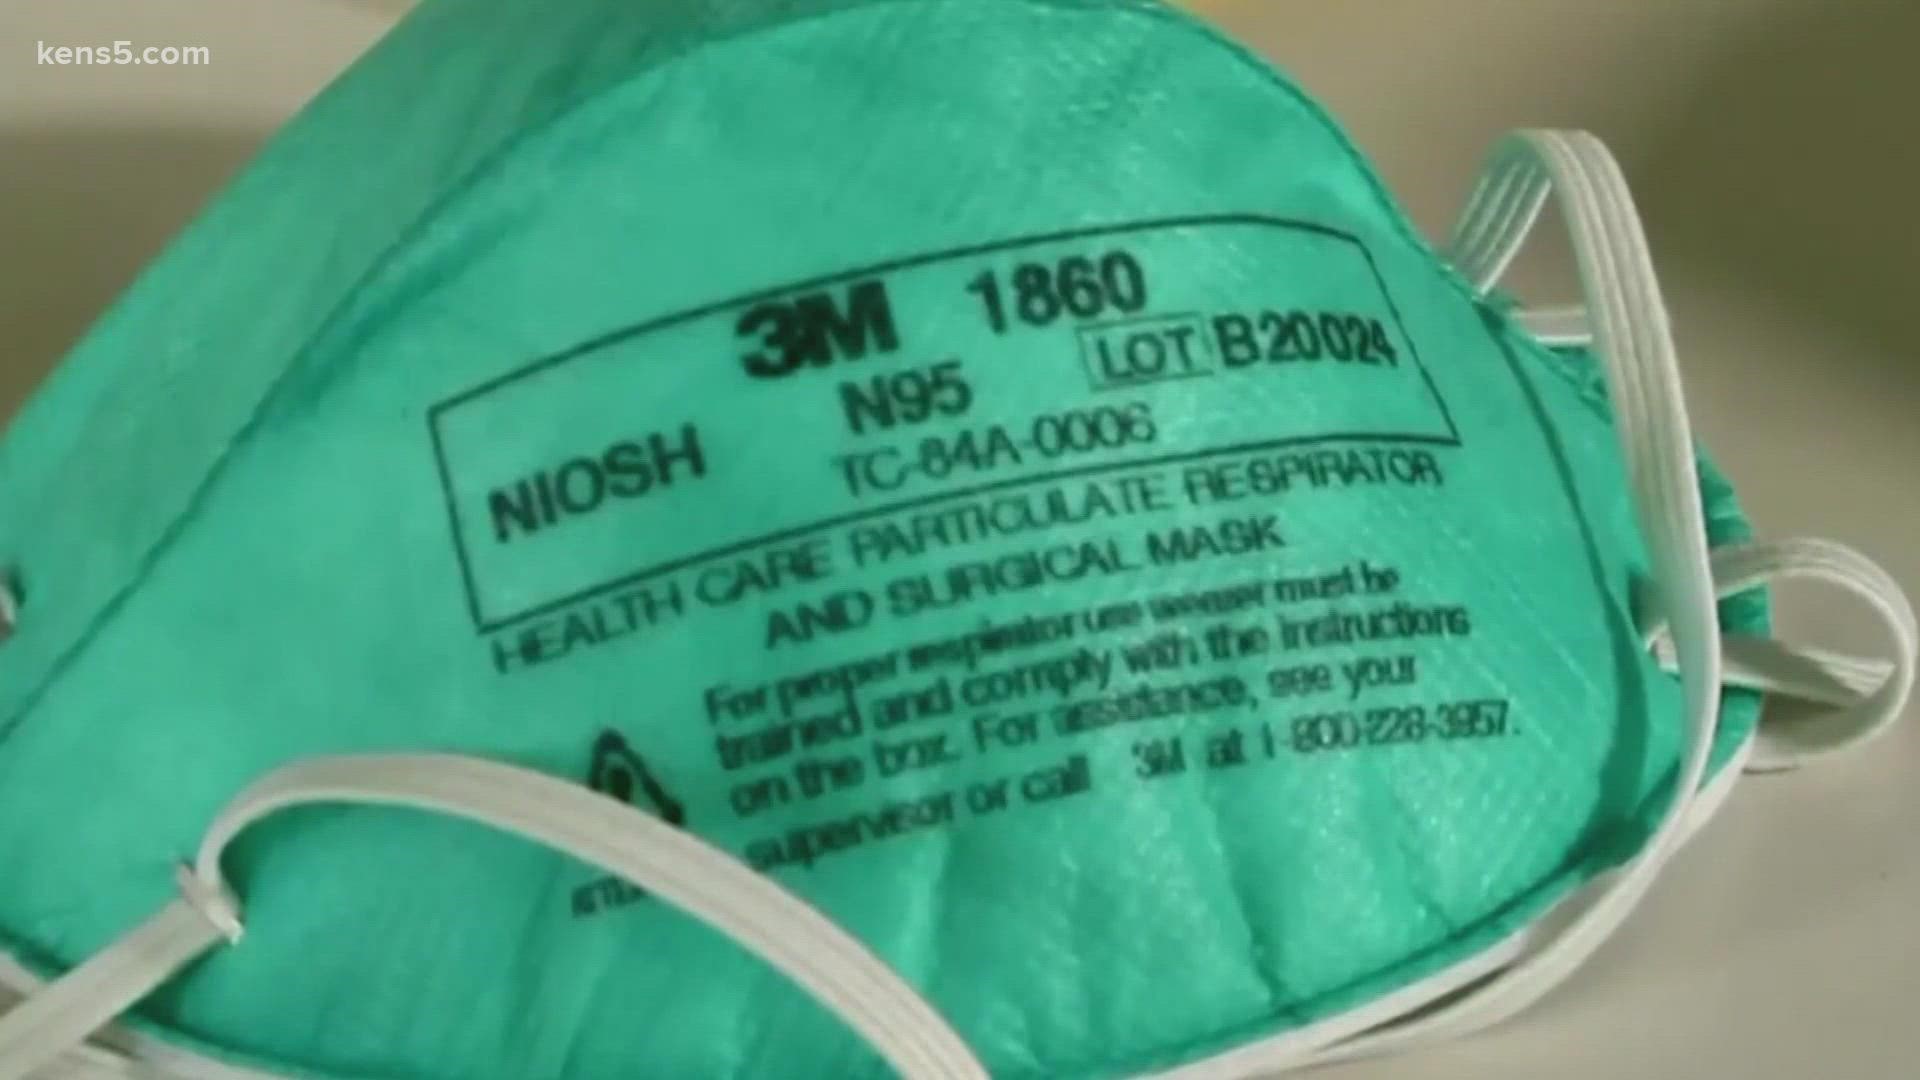 Texas company offered N95 masks amid coronavirus at 6 times usual price